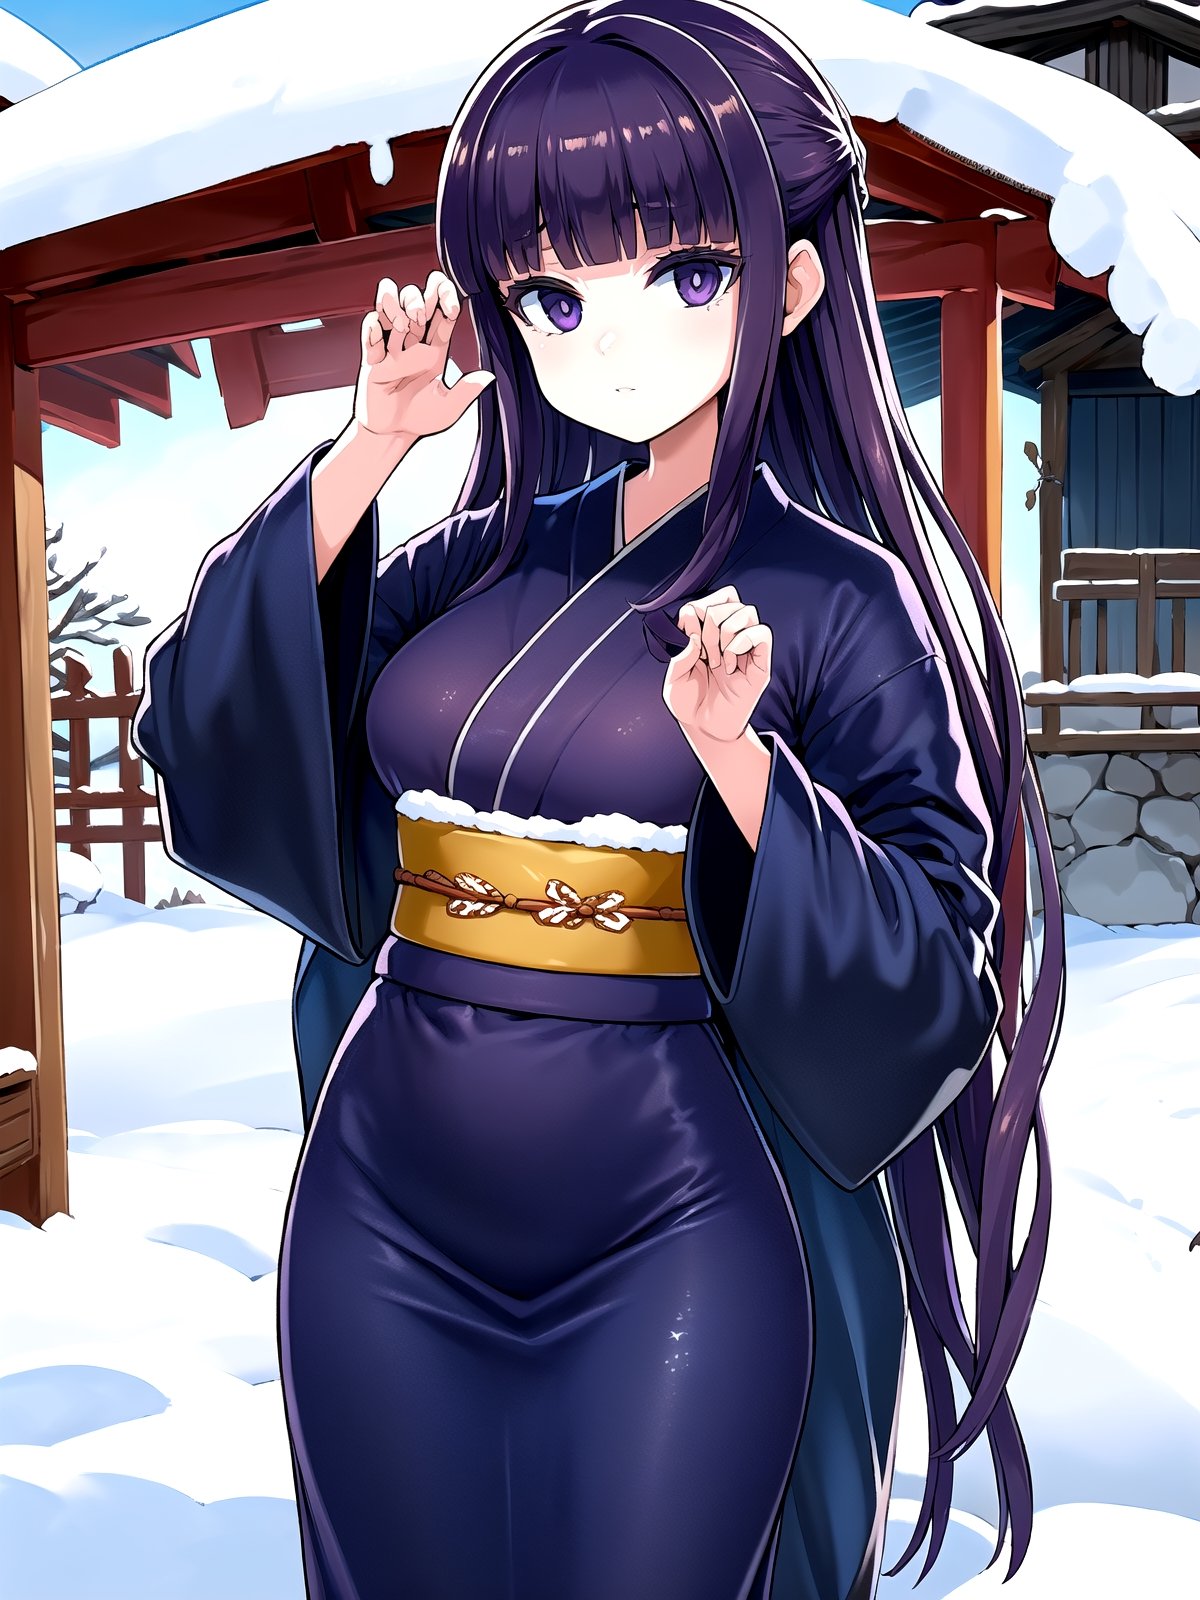 //Quality,
(masterpiece), (best quality), 8k illustration,
,//Character,
1girl, solo,
,//Fashion,
details (dark blue silk brocade kimono)
,//Background,
Kyoto, outdoors, winter, snow
,//Others,
goodbye pose,aafern, long hair, purple hair